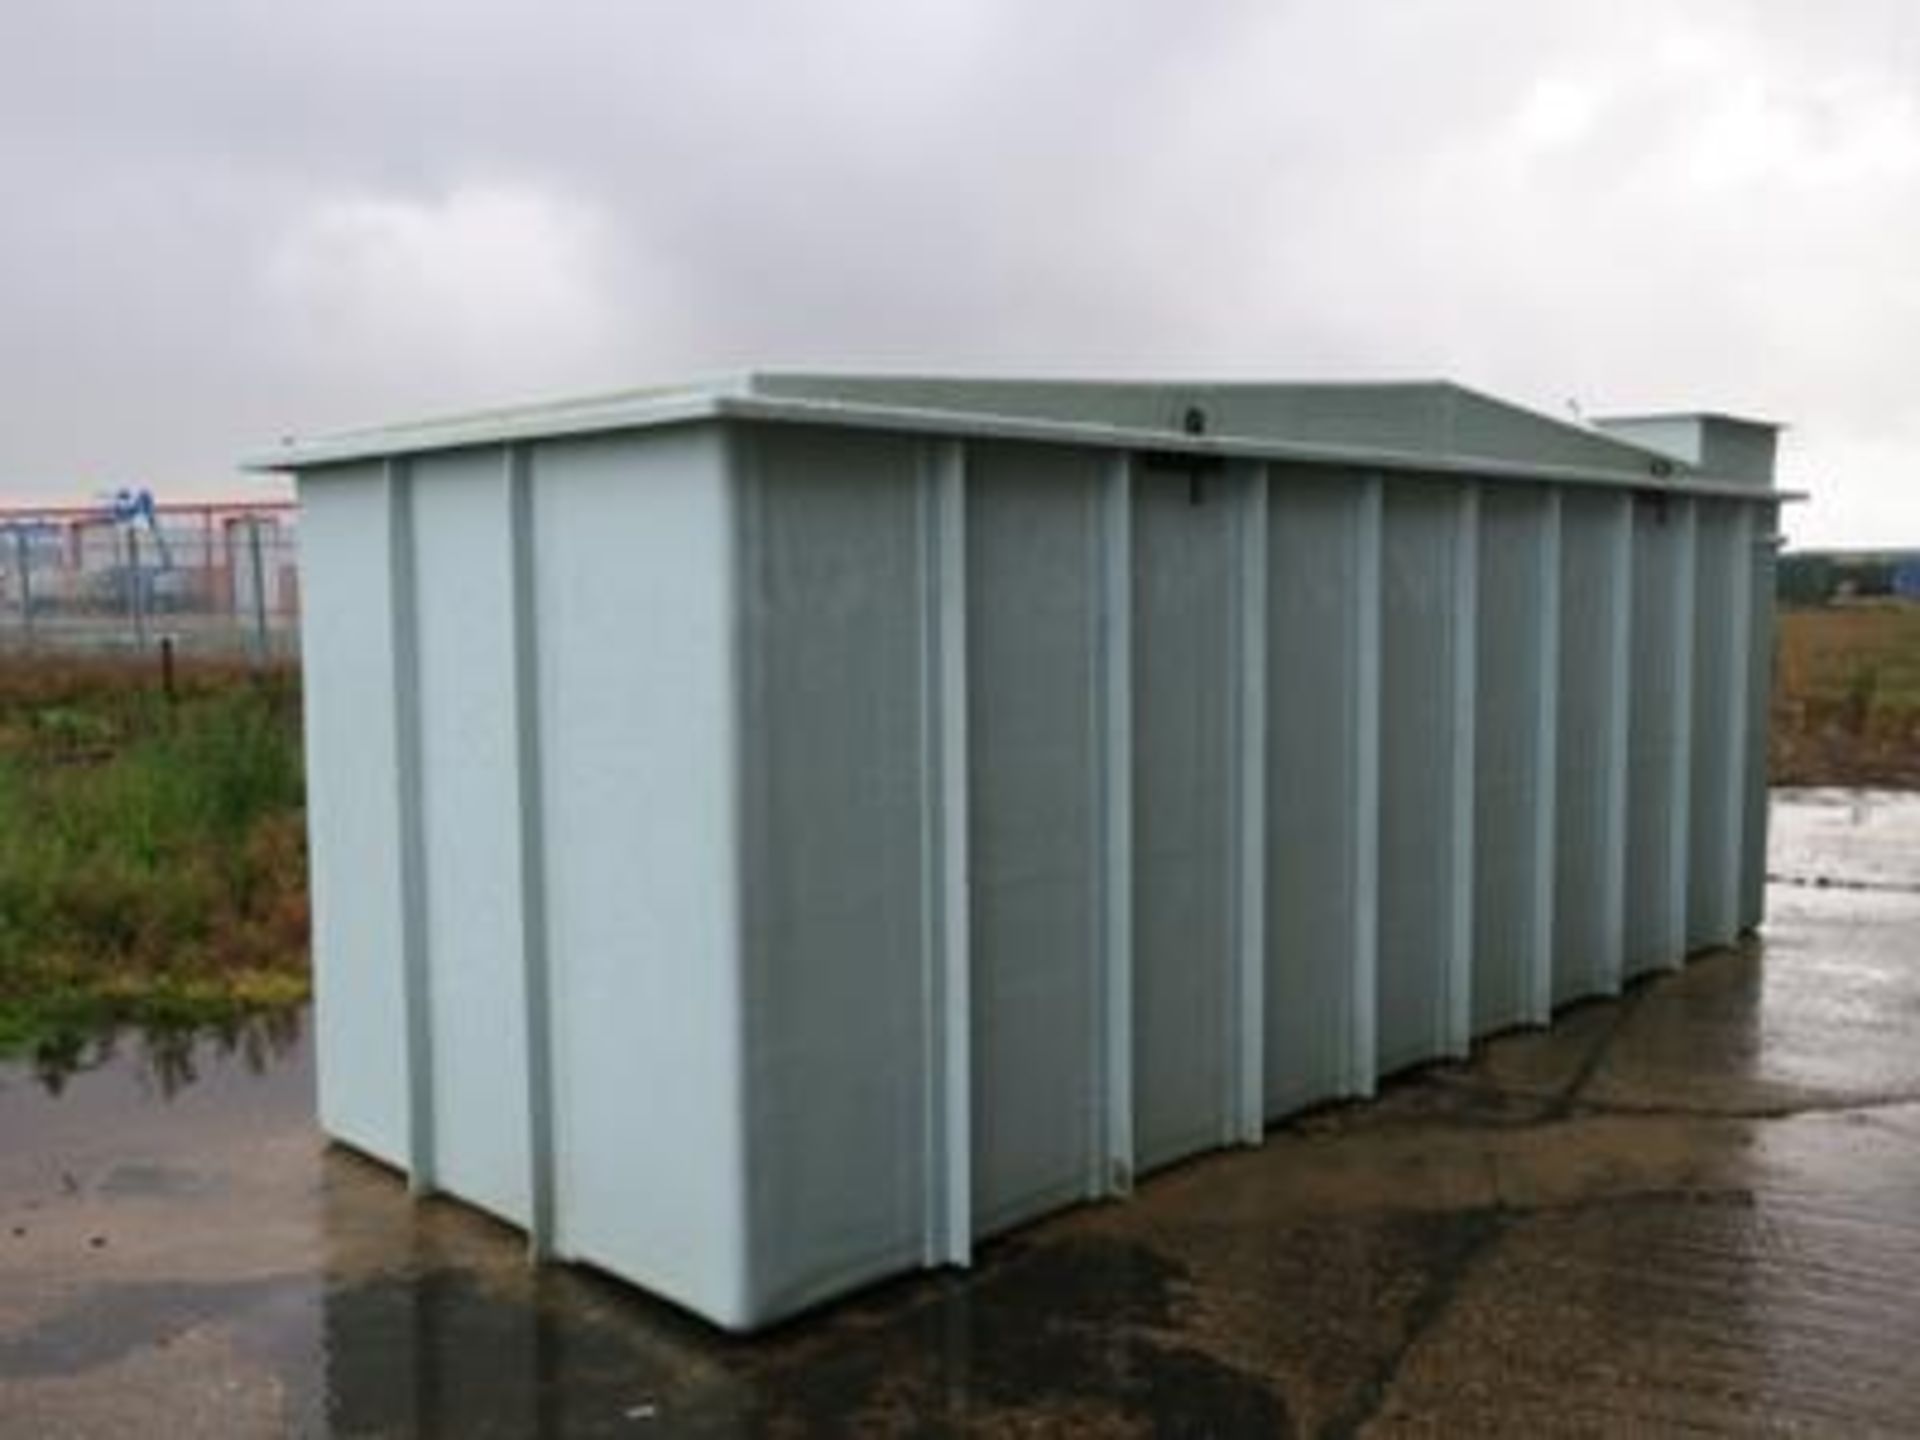 * A rainwater Harvesting Tank approx 24,000 litres, 6000mm Long x 2000mm Wide, x 2000mm High, to